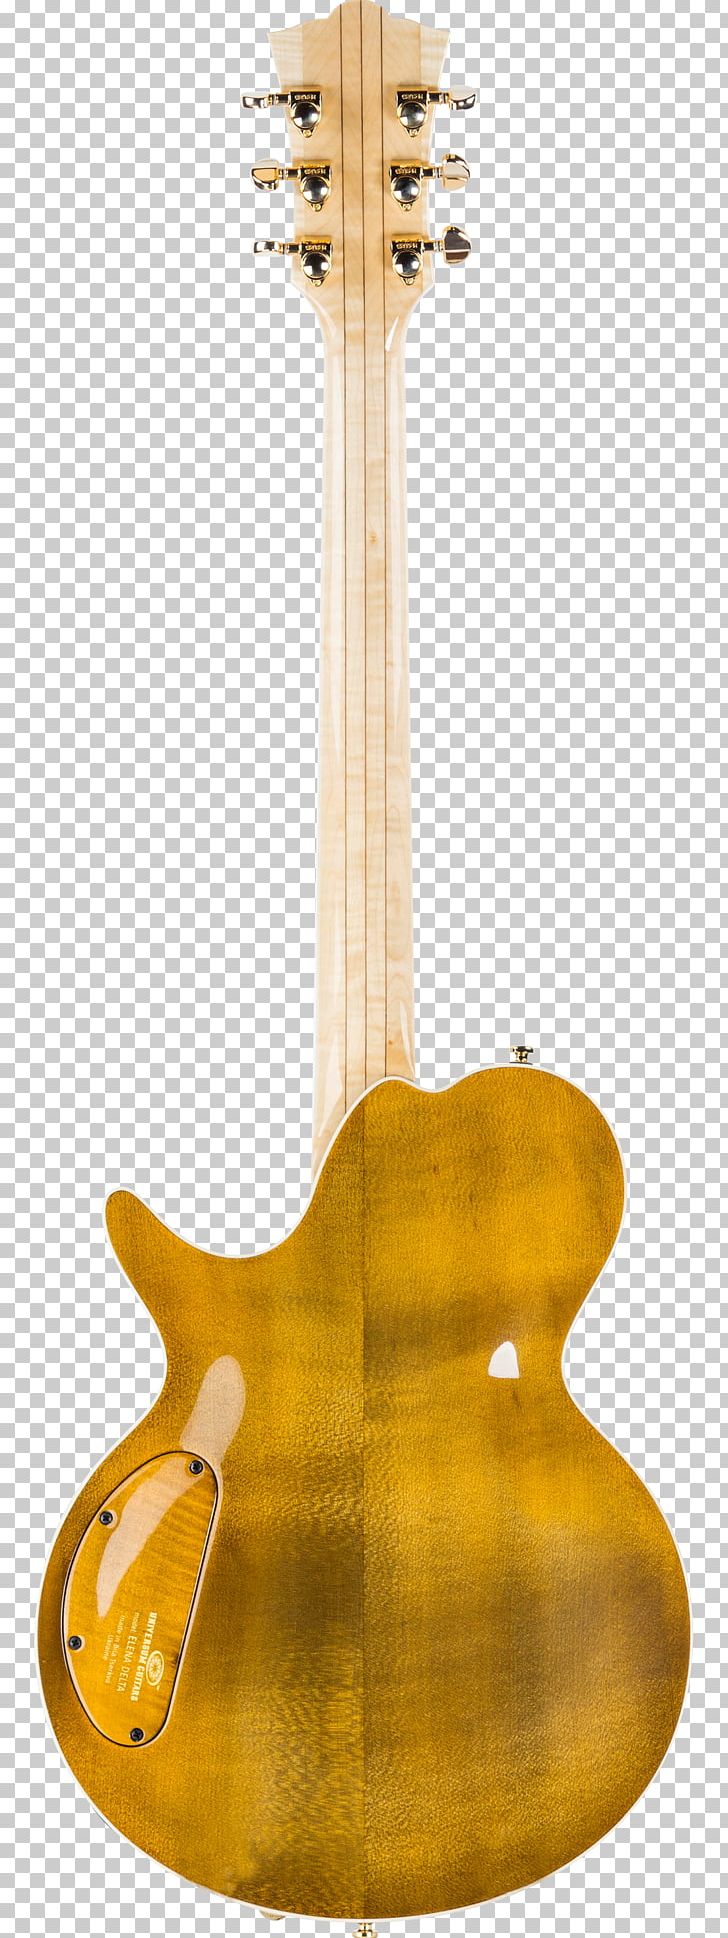 Acoustic Guitar Acoustic-electric Guitar Bass Guitar Bass Violin PNG, Clipart, Acousticelectric Guitar, Acoustic Guitar, Acoustic Music, Bass Guitar, Bass Violin Free PNG Download